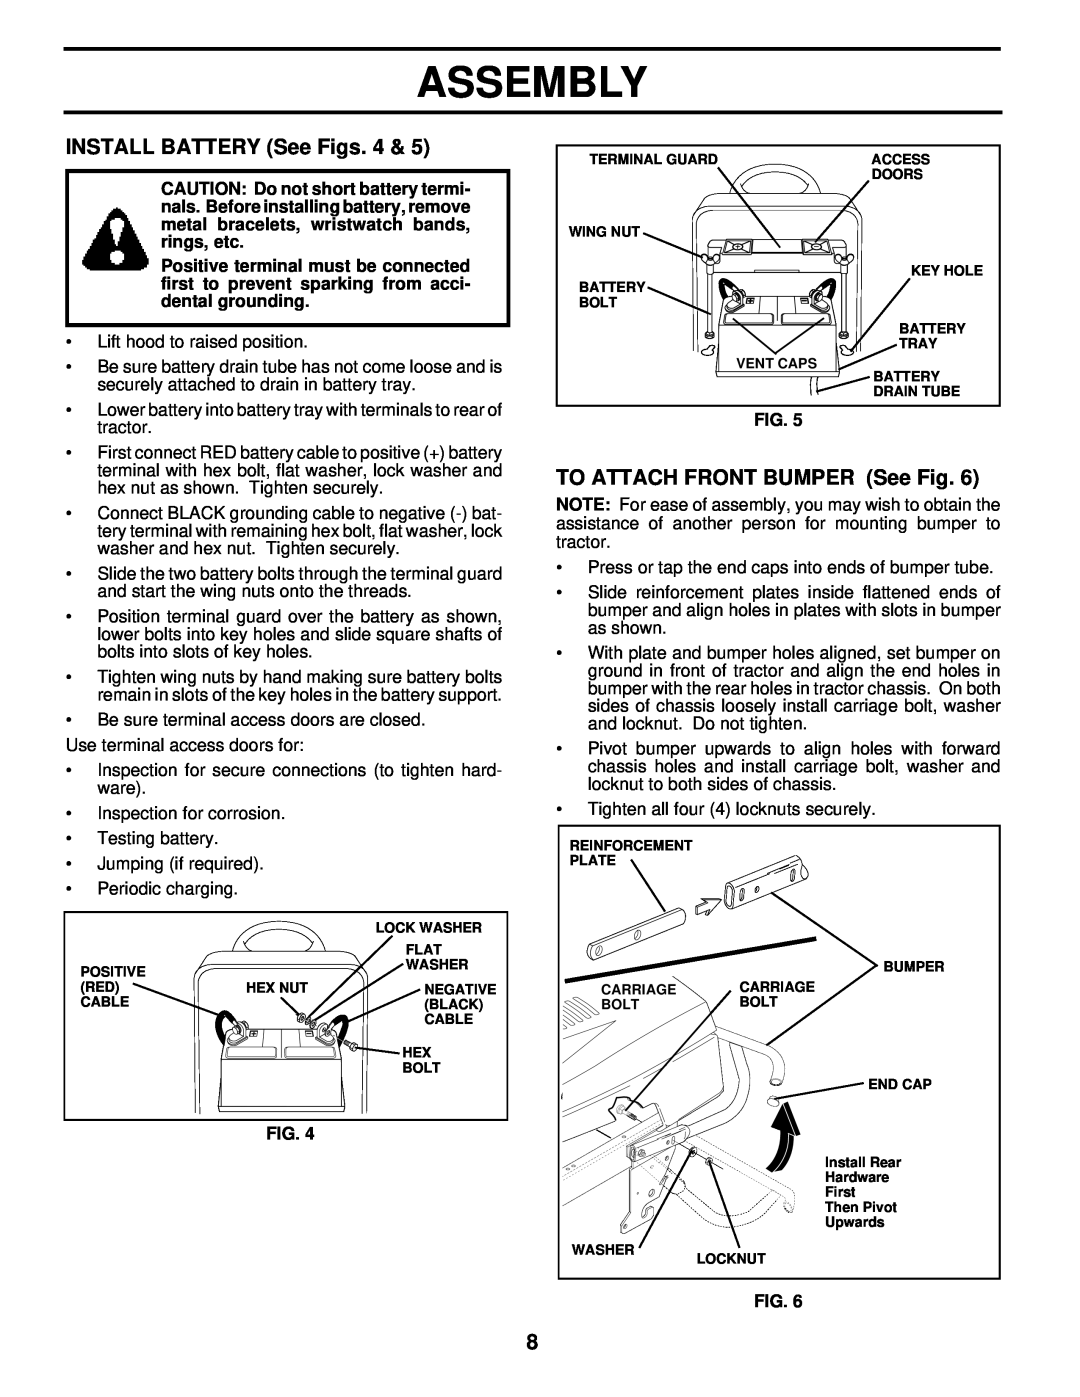 Husqvarna YT180 owner manual INSTALL BATTERY See Figs. 4, TO ATTACH FRONT BUMPER See Fig, Periodic charging, Assembly 